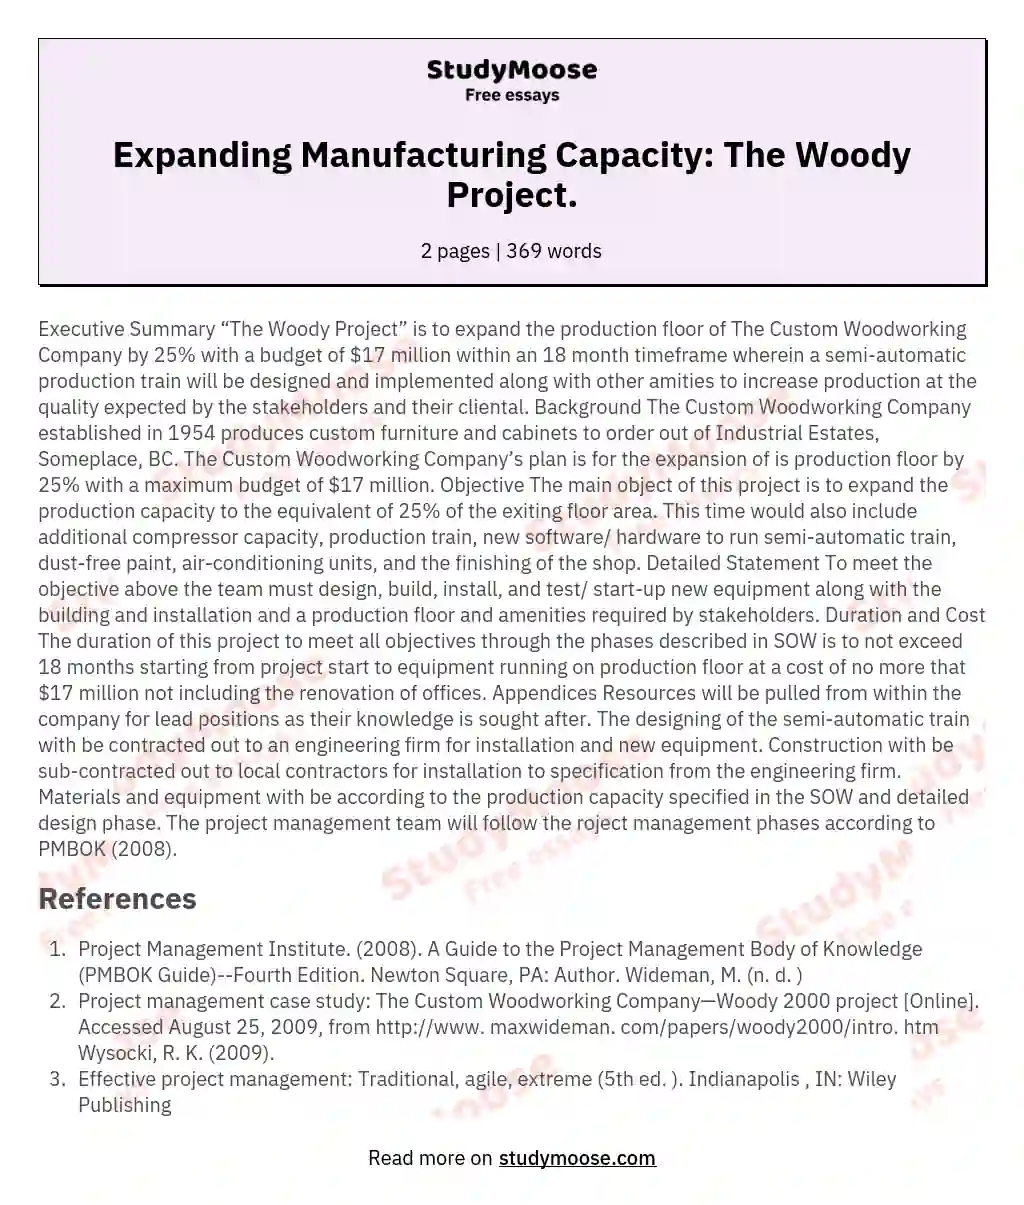 Expanding Manufacturing Capacity: The Woody Project. essay